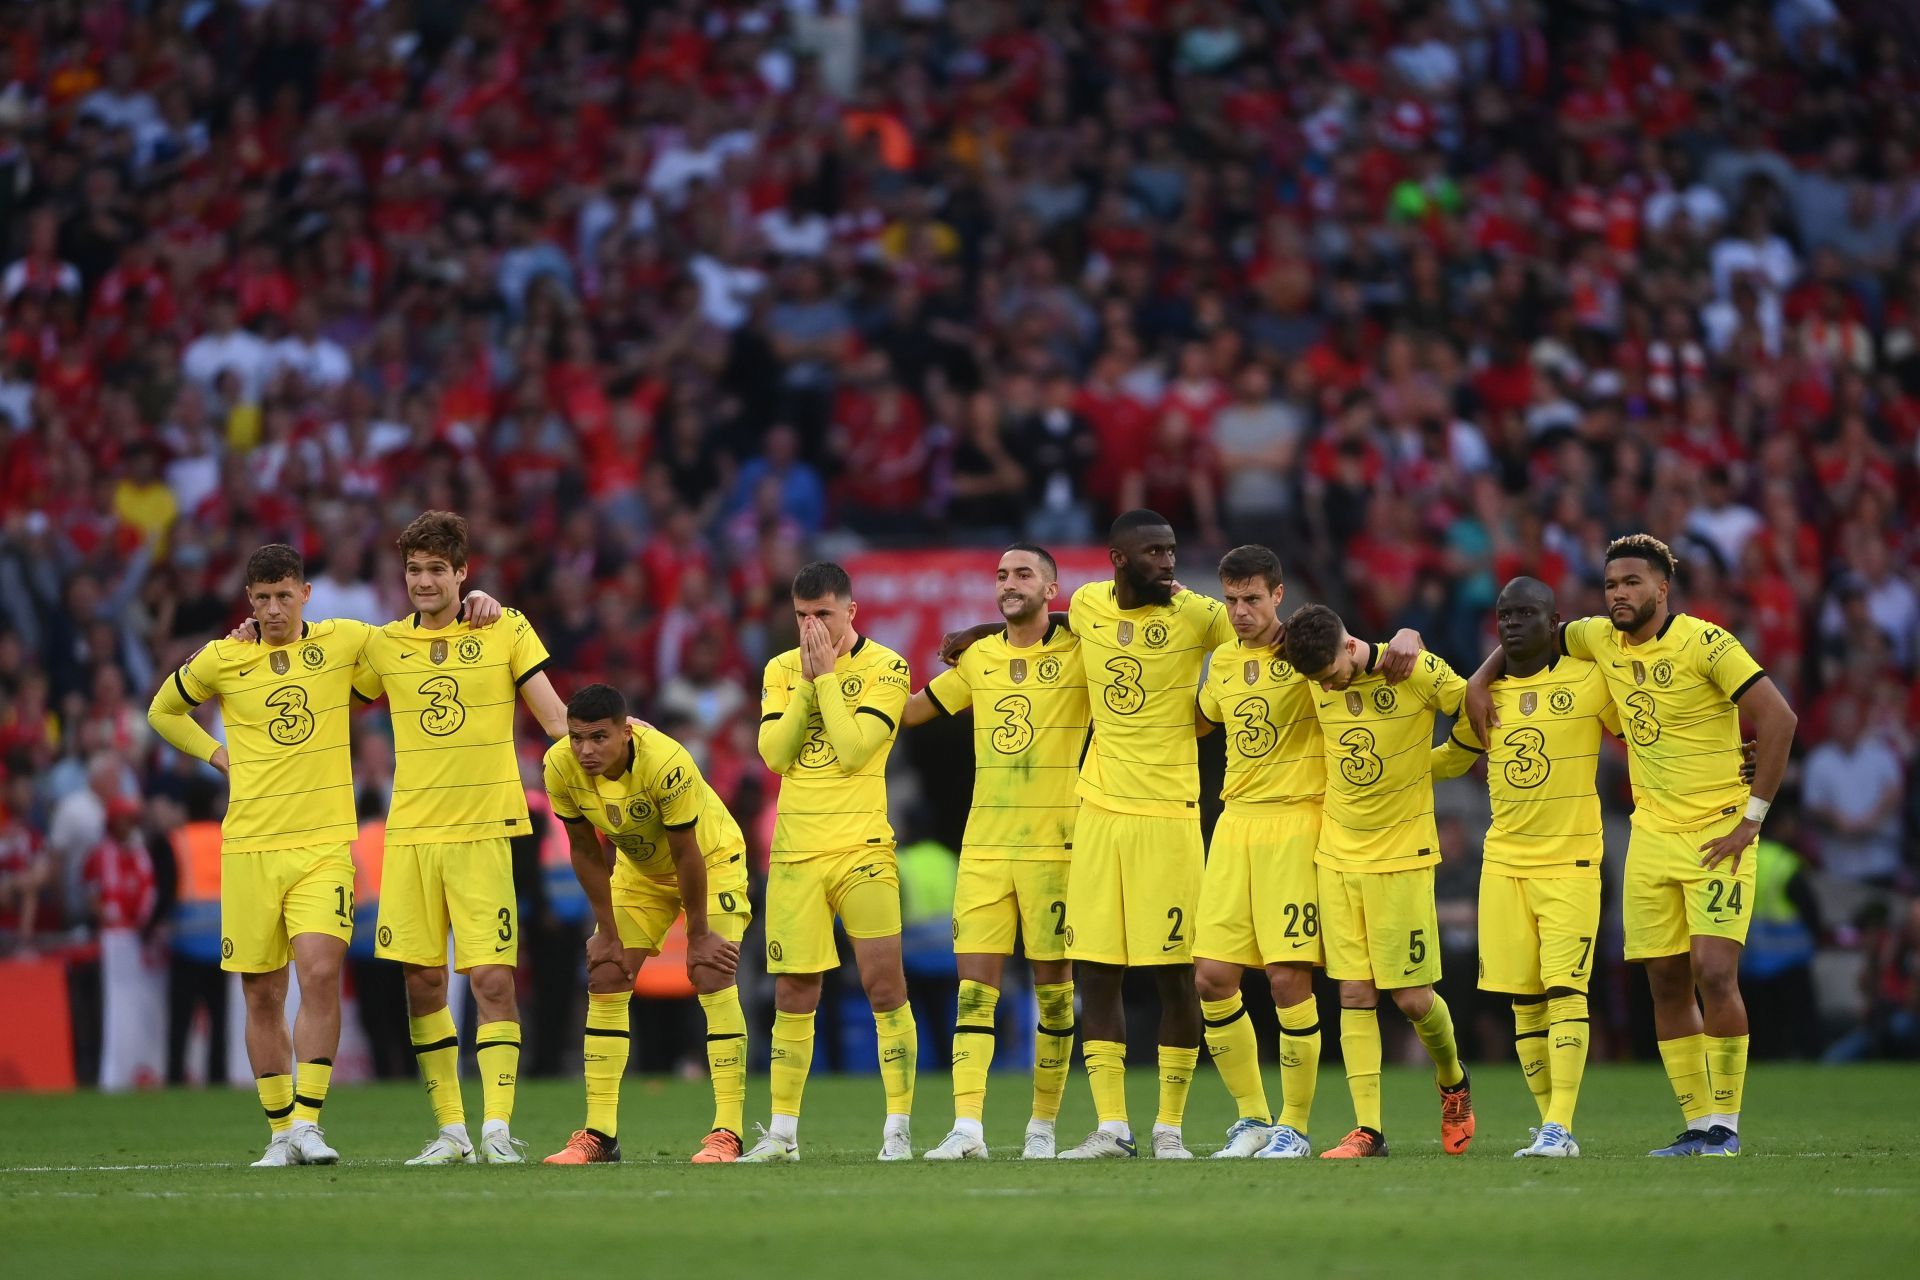 The Blues lost the FA Cup final on penalties to Liverpool at the Wembley Stadium.